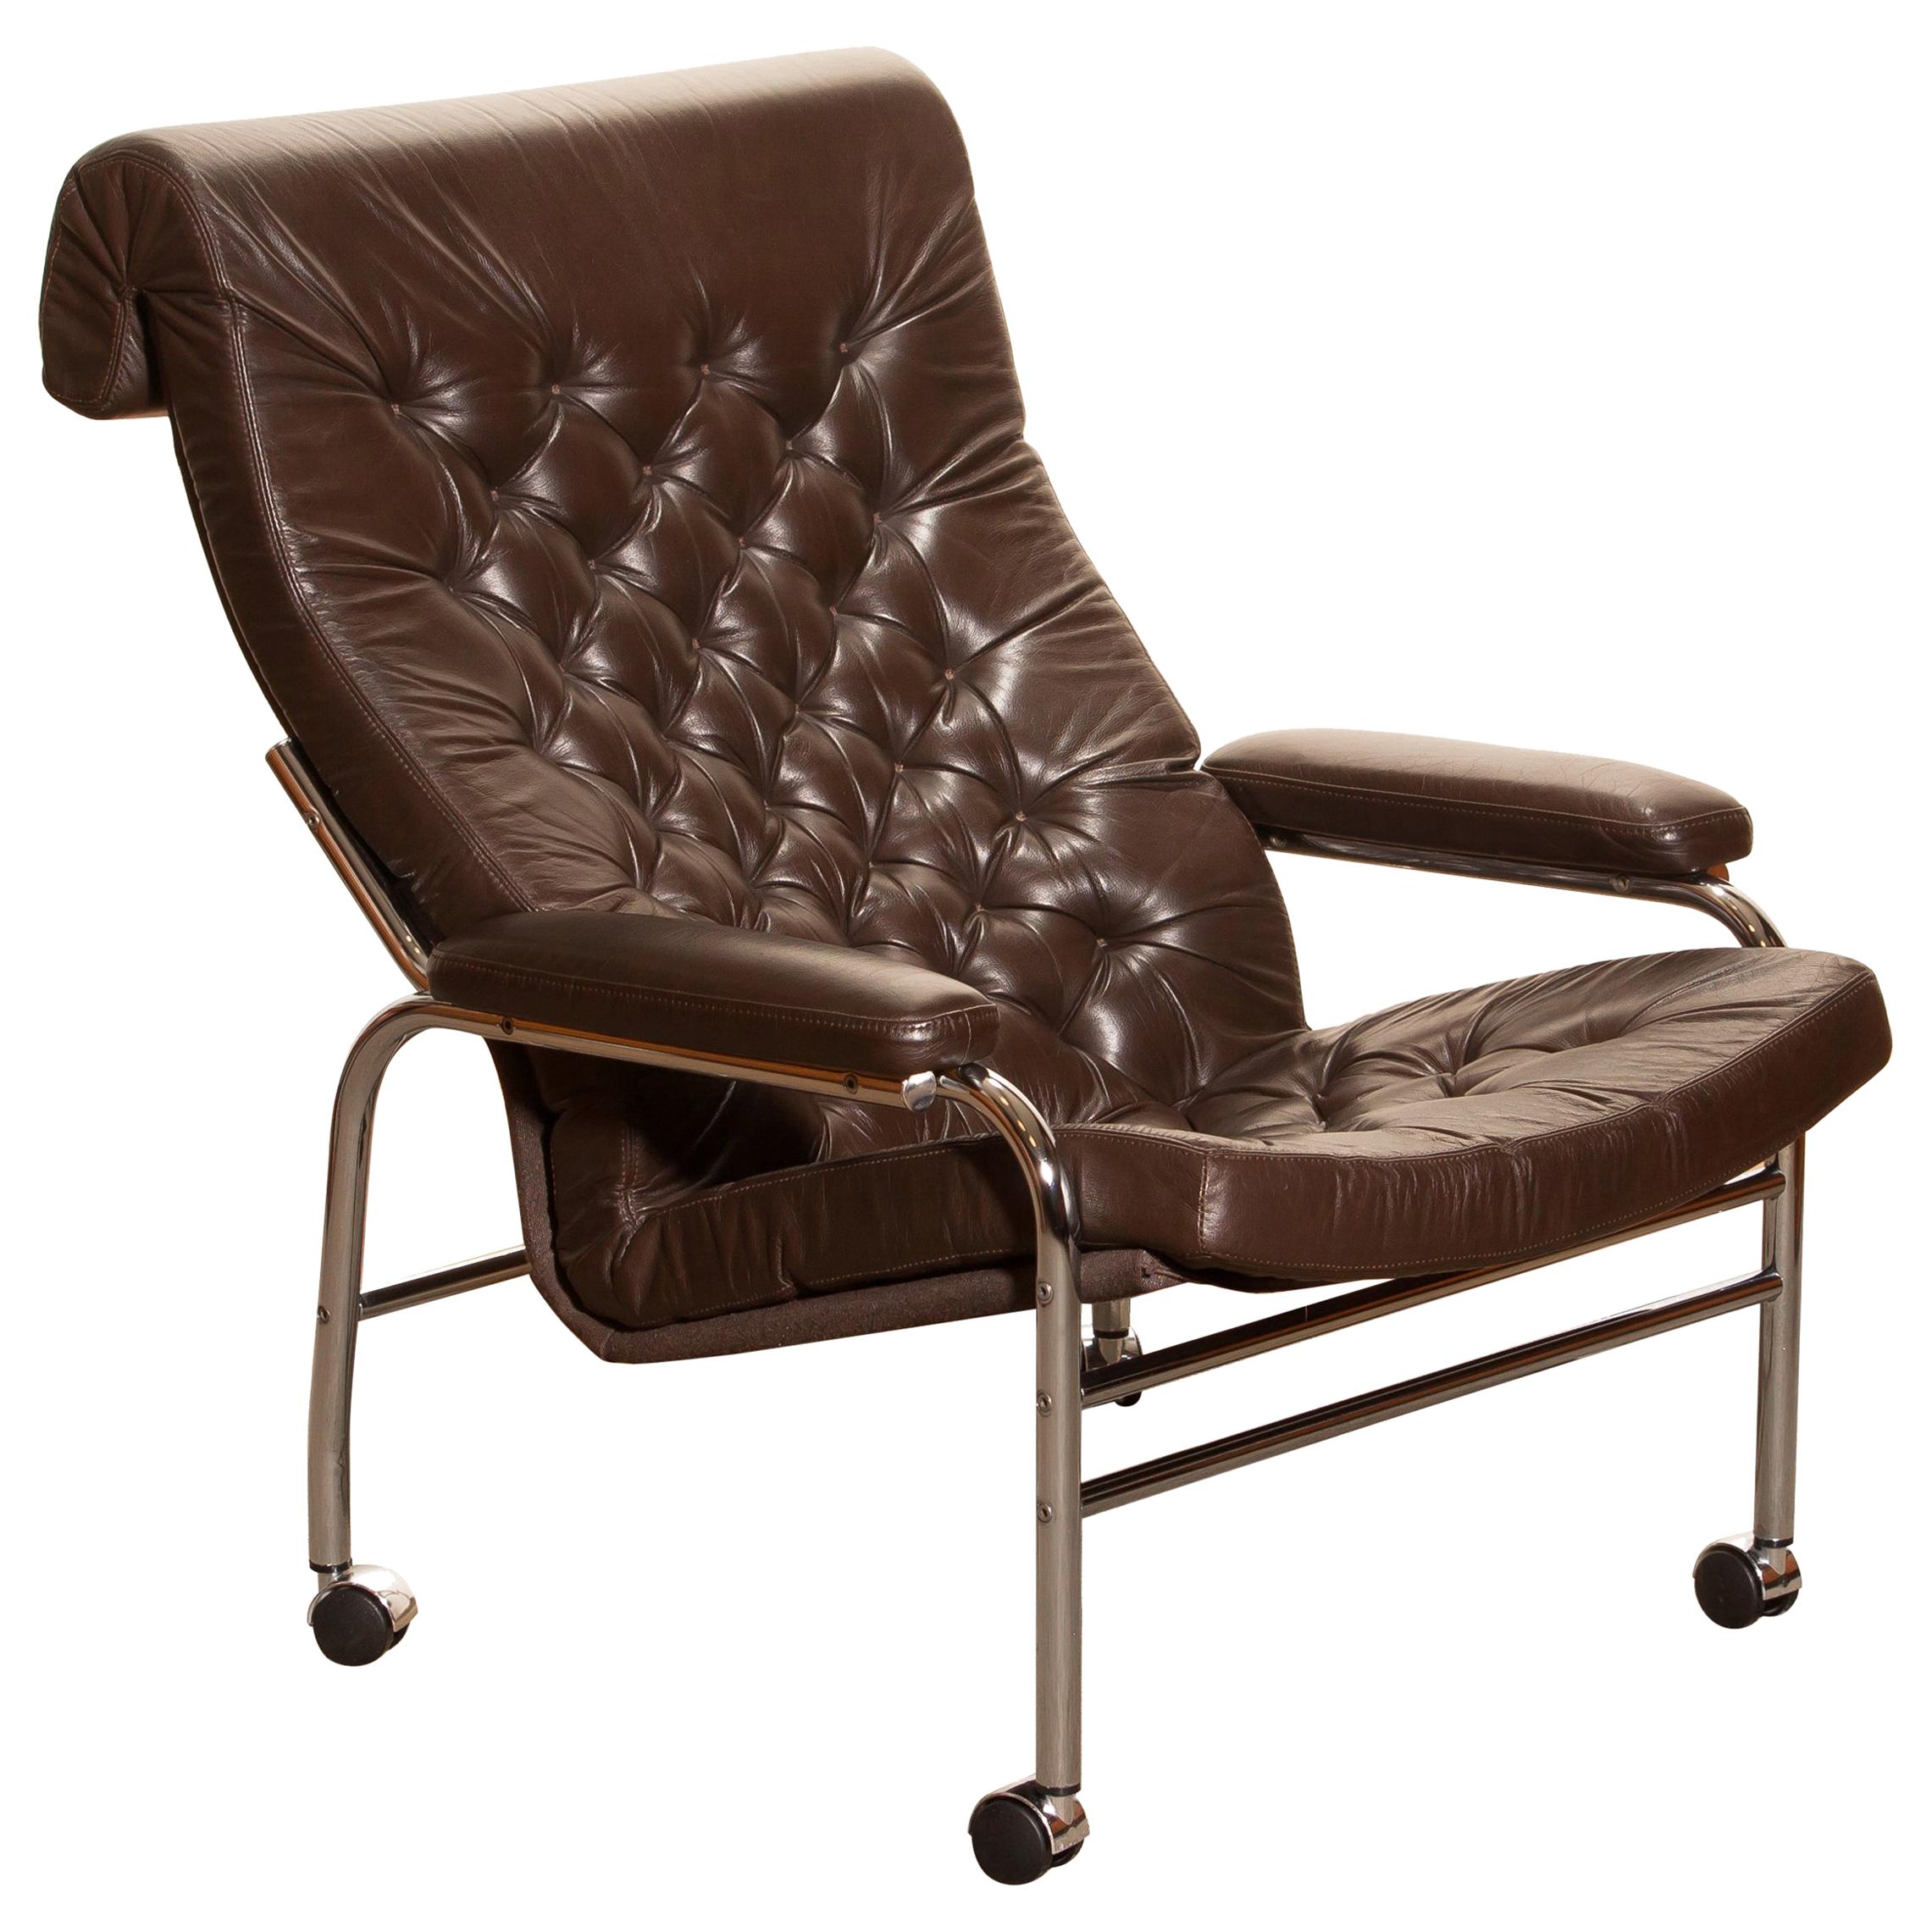 Mid-Century Modern 1970s, Leather and Chrome Lounge Chair 'Bore' by Noboru Nakamura